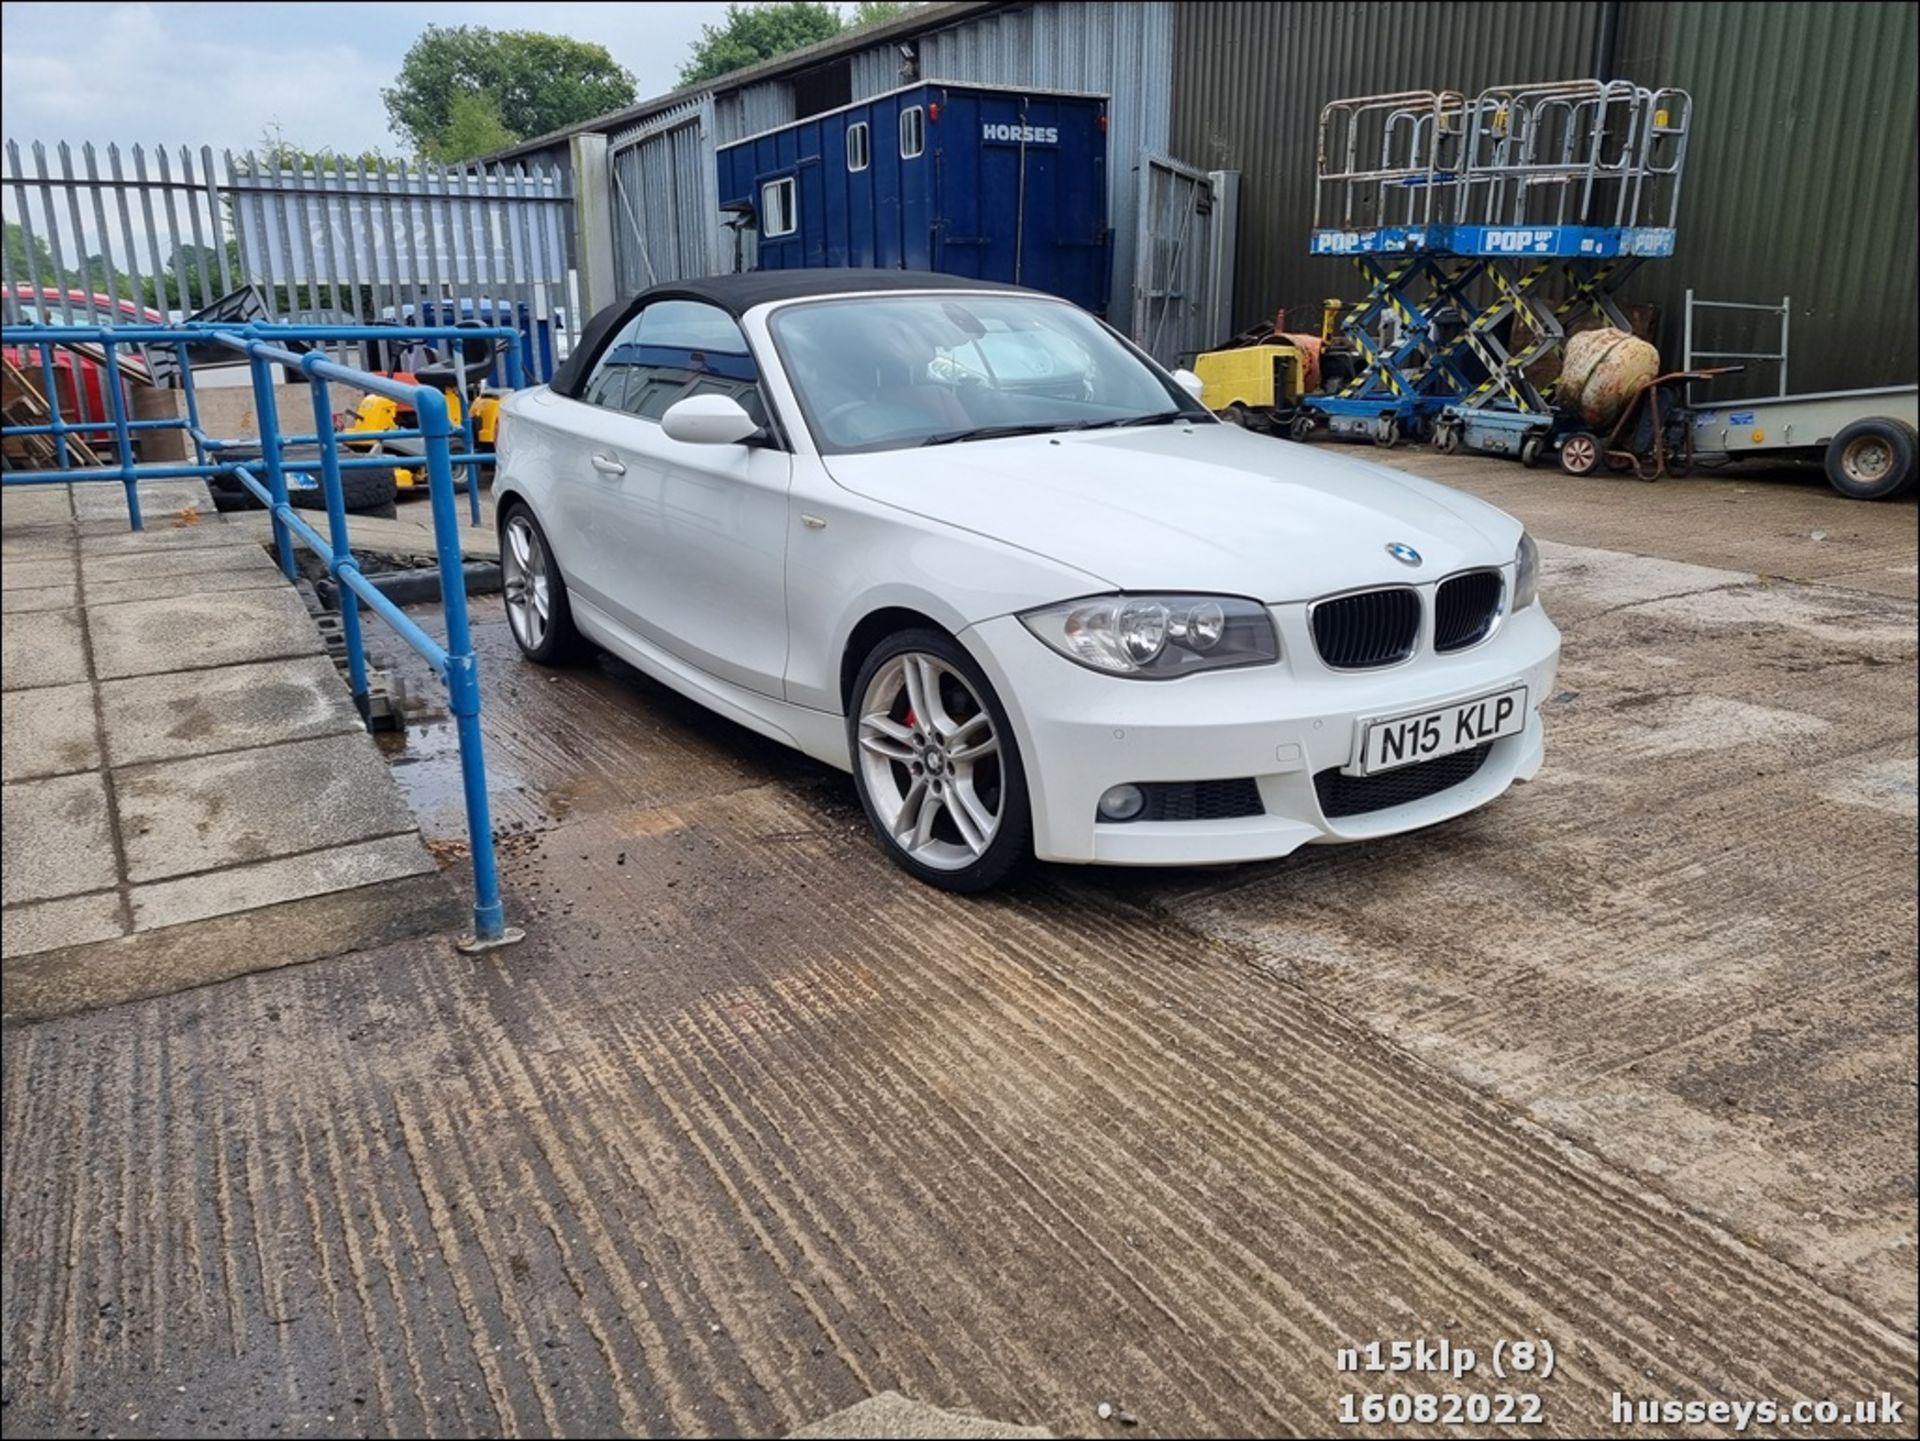 2008 BMW 118I M SPORT - 1995cc 2dr Convertible (White, 97k) - Image 8 of 19